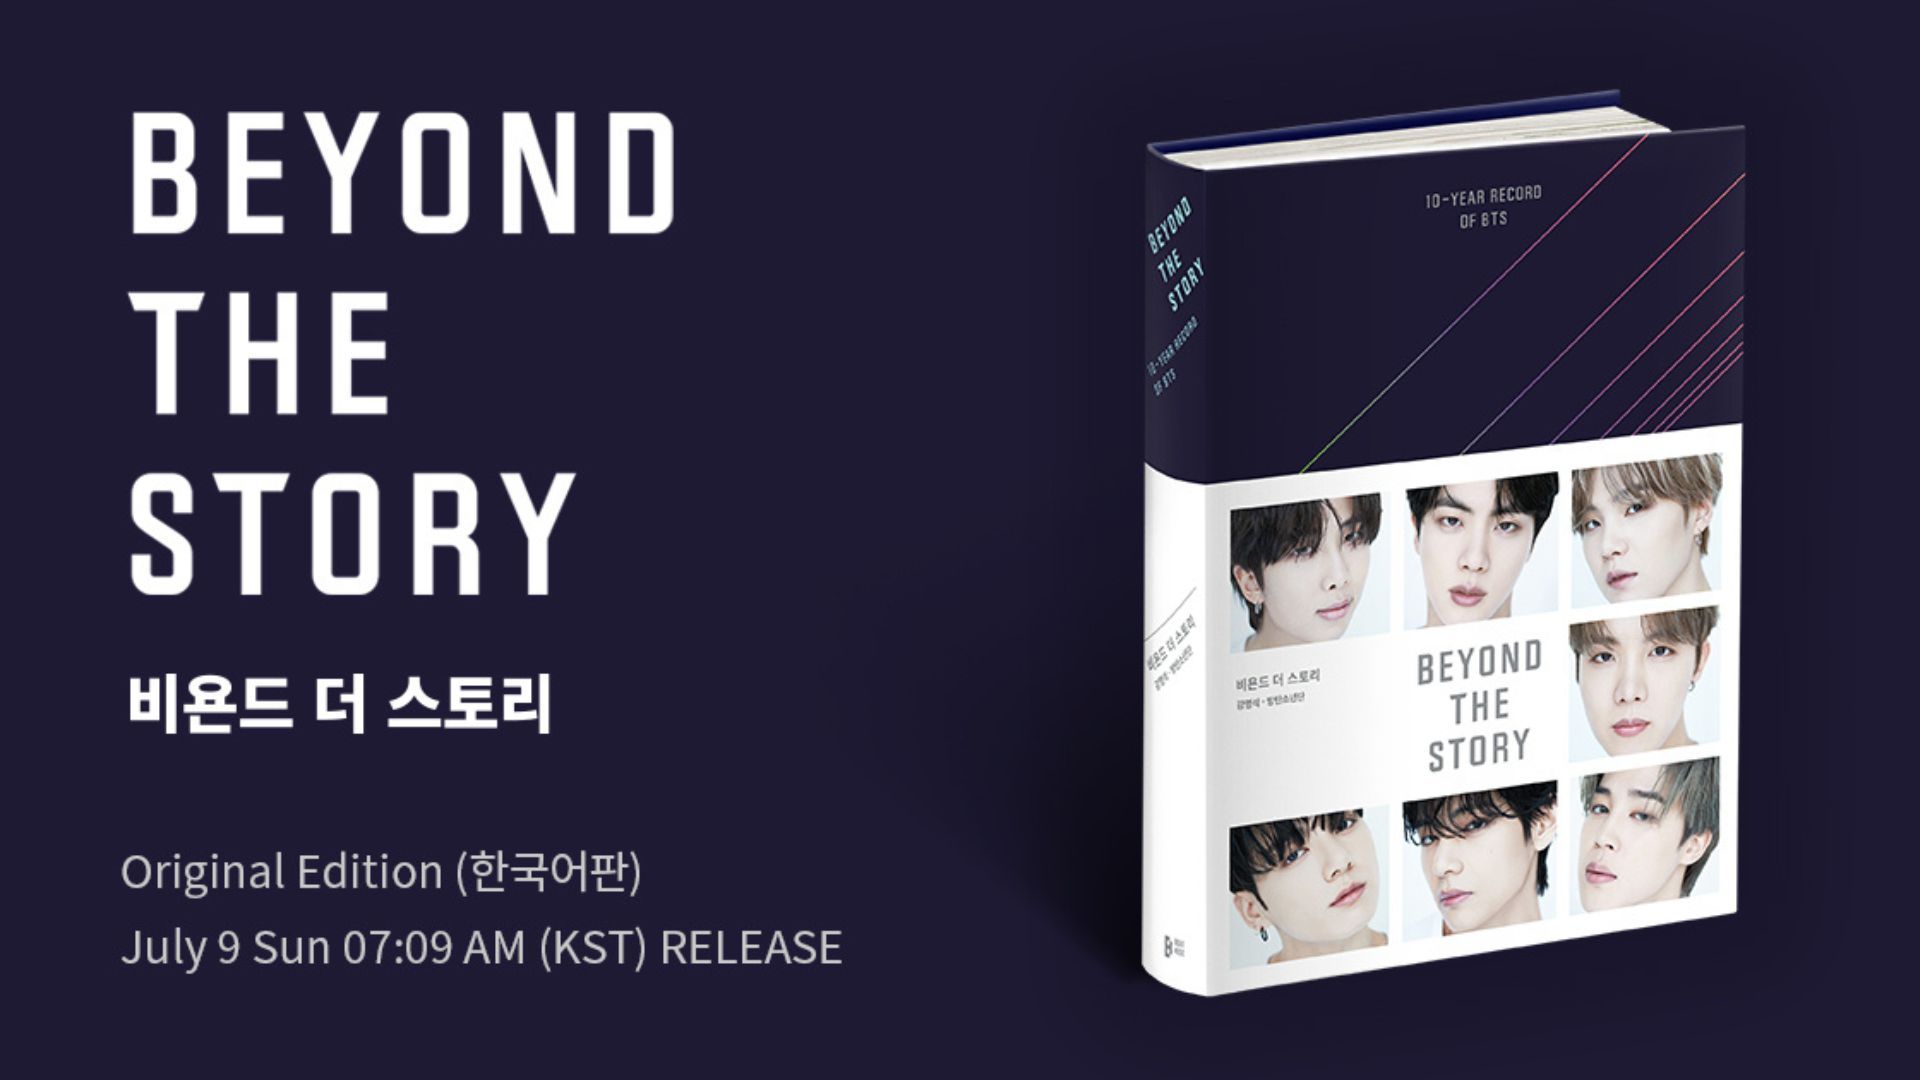 New BTS Book Beyond The Story Peaks At No. 1 On Amazon Charts